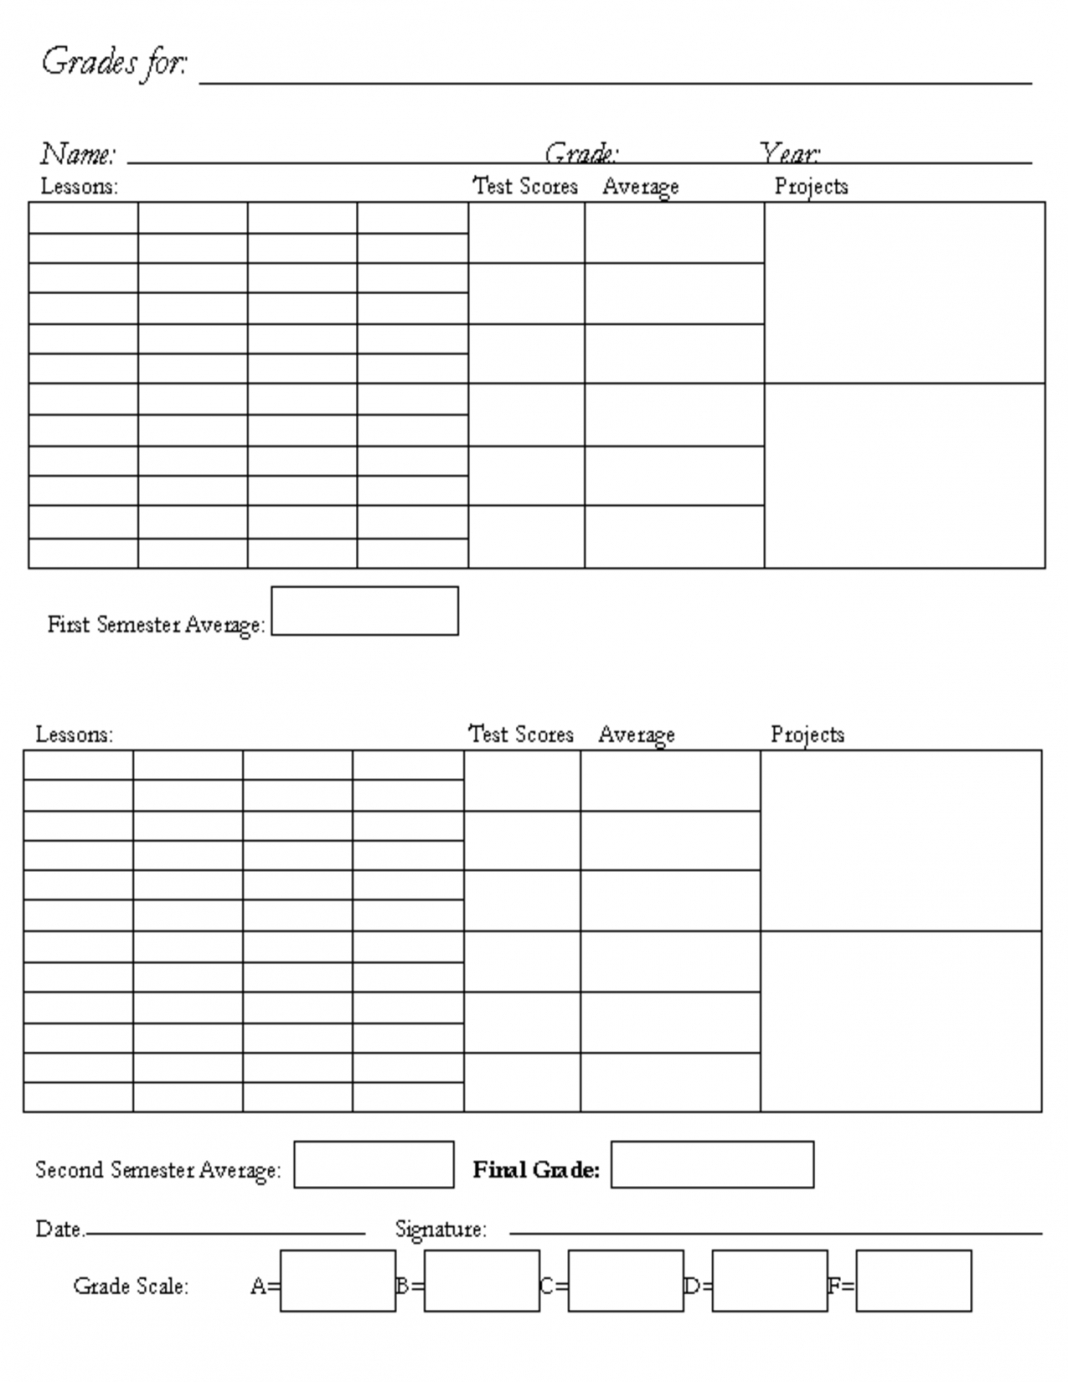 Homeschool Report Card Emplate Examples Best Photos Of Intended For Homeschool Middle School Report Card Template